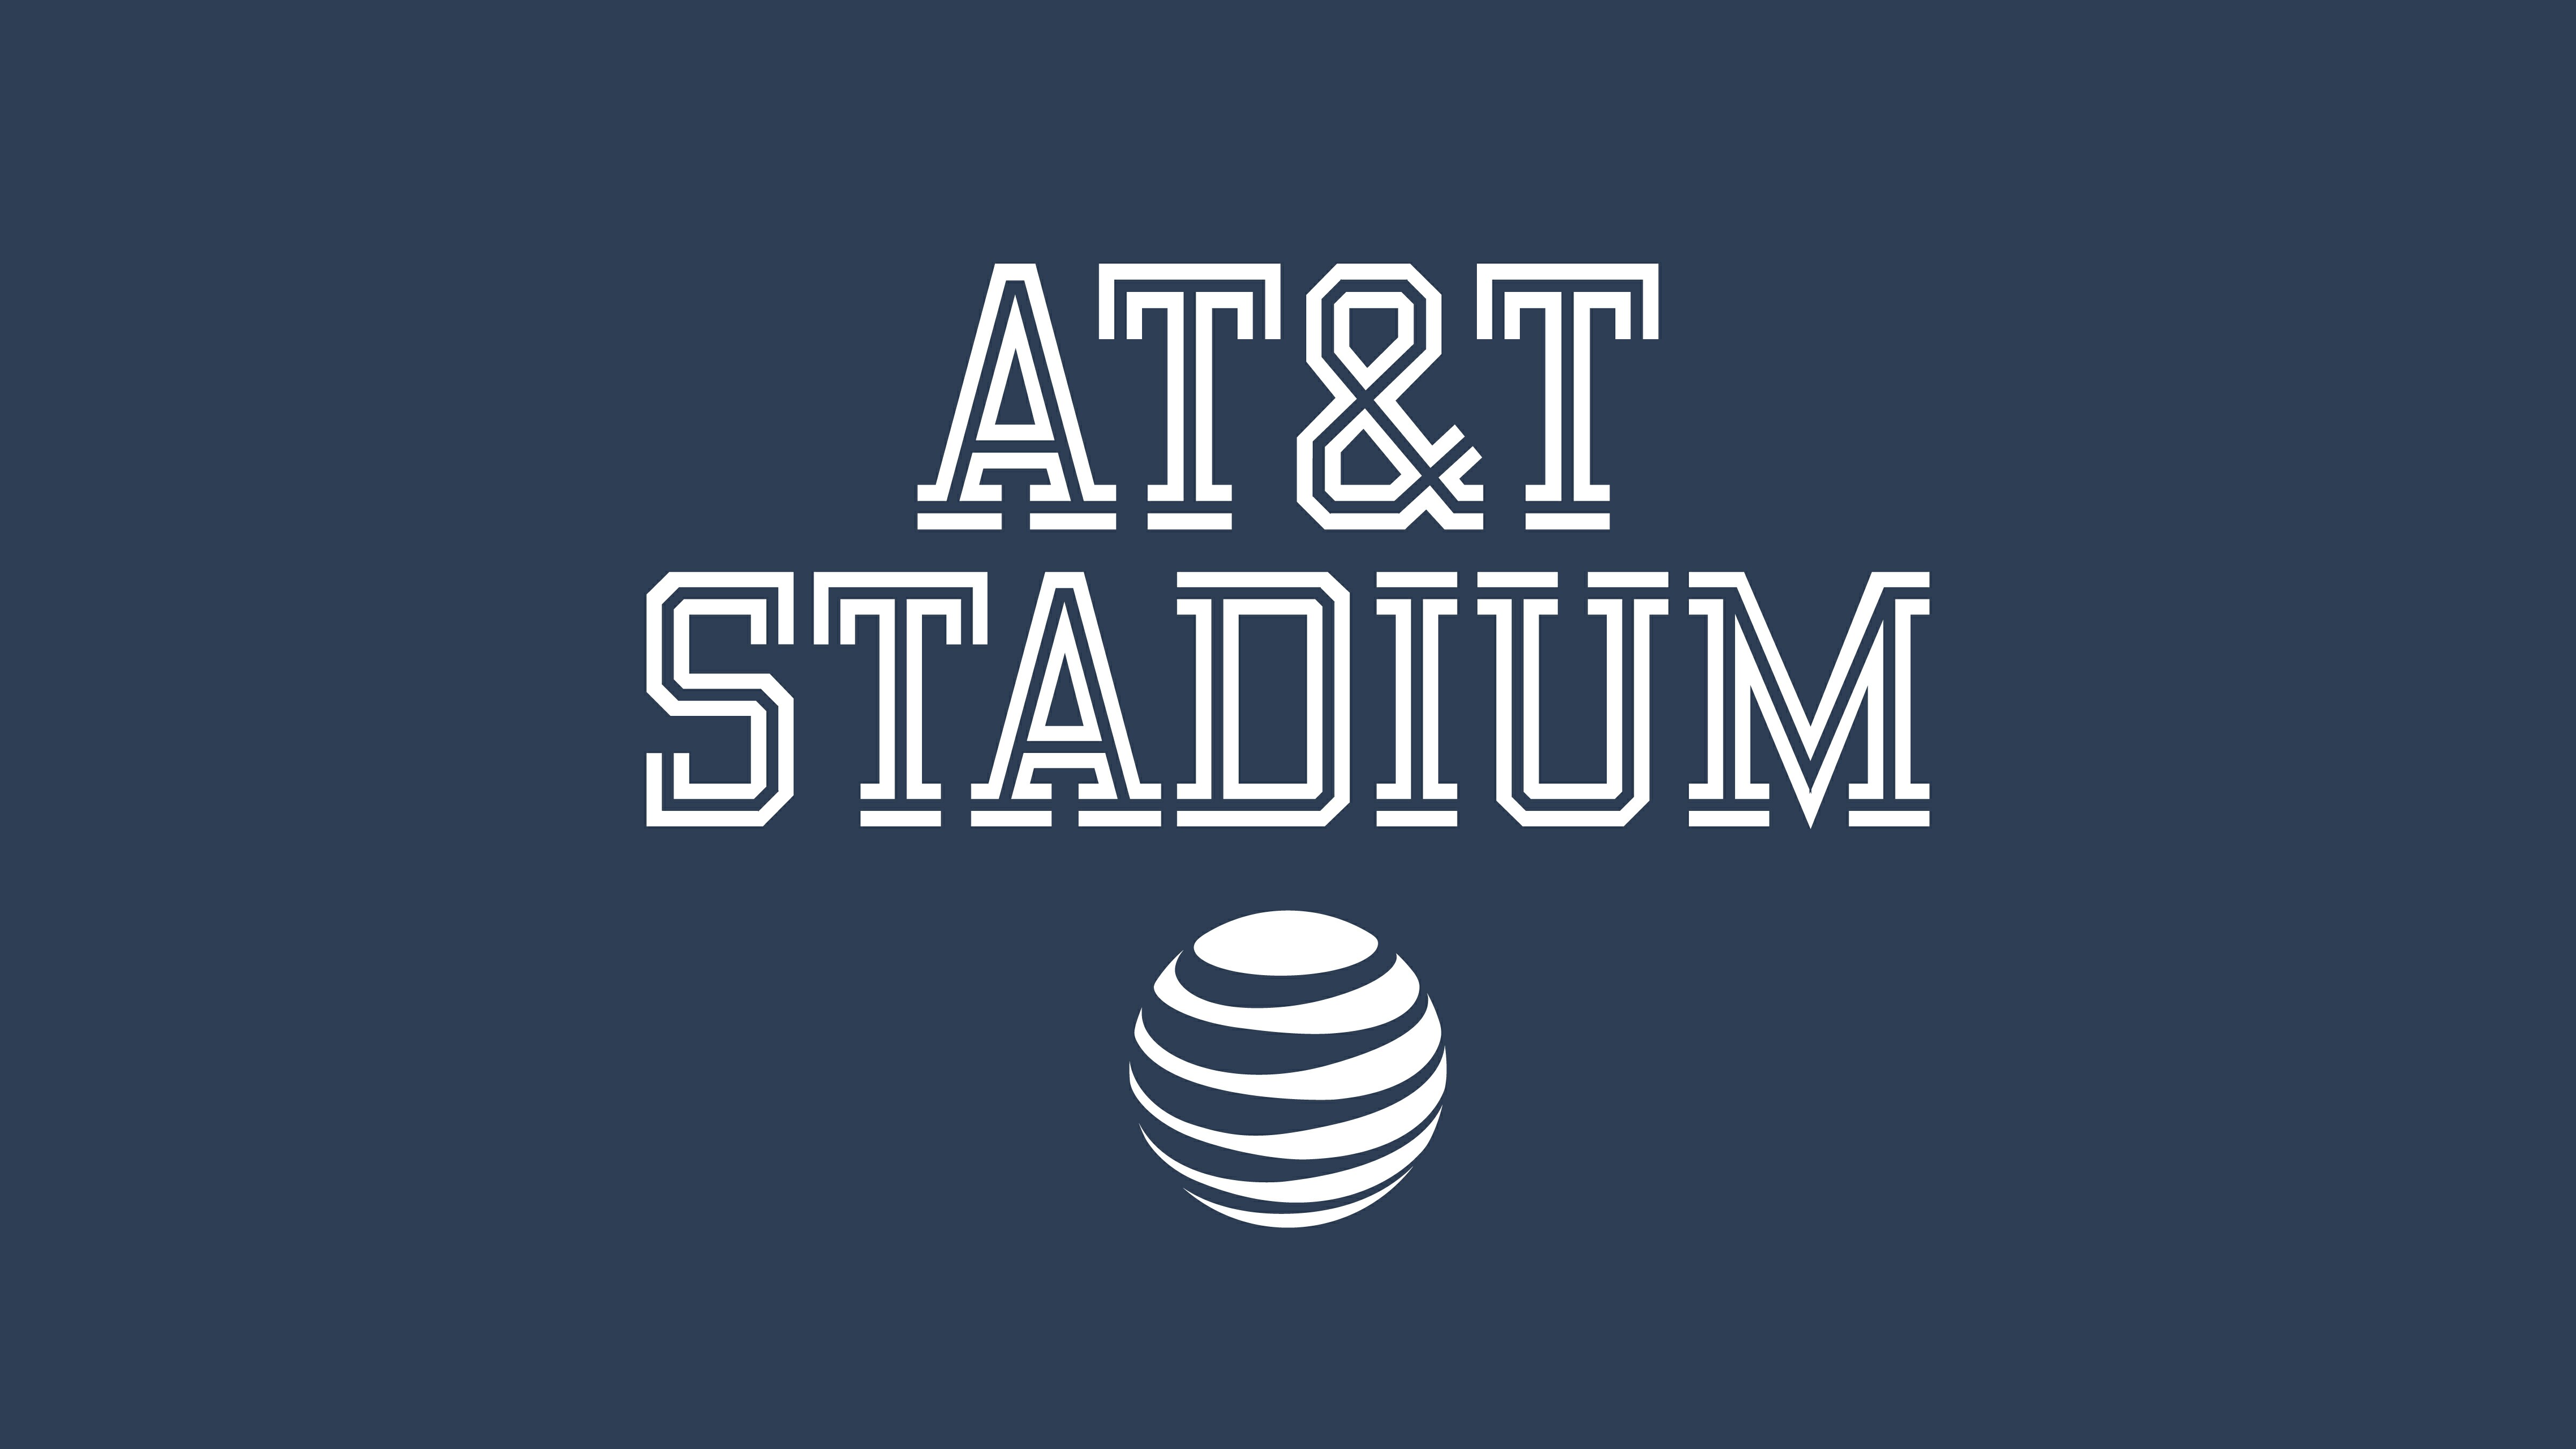 AT&T Stadium - Home of the Dallas Cowboys